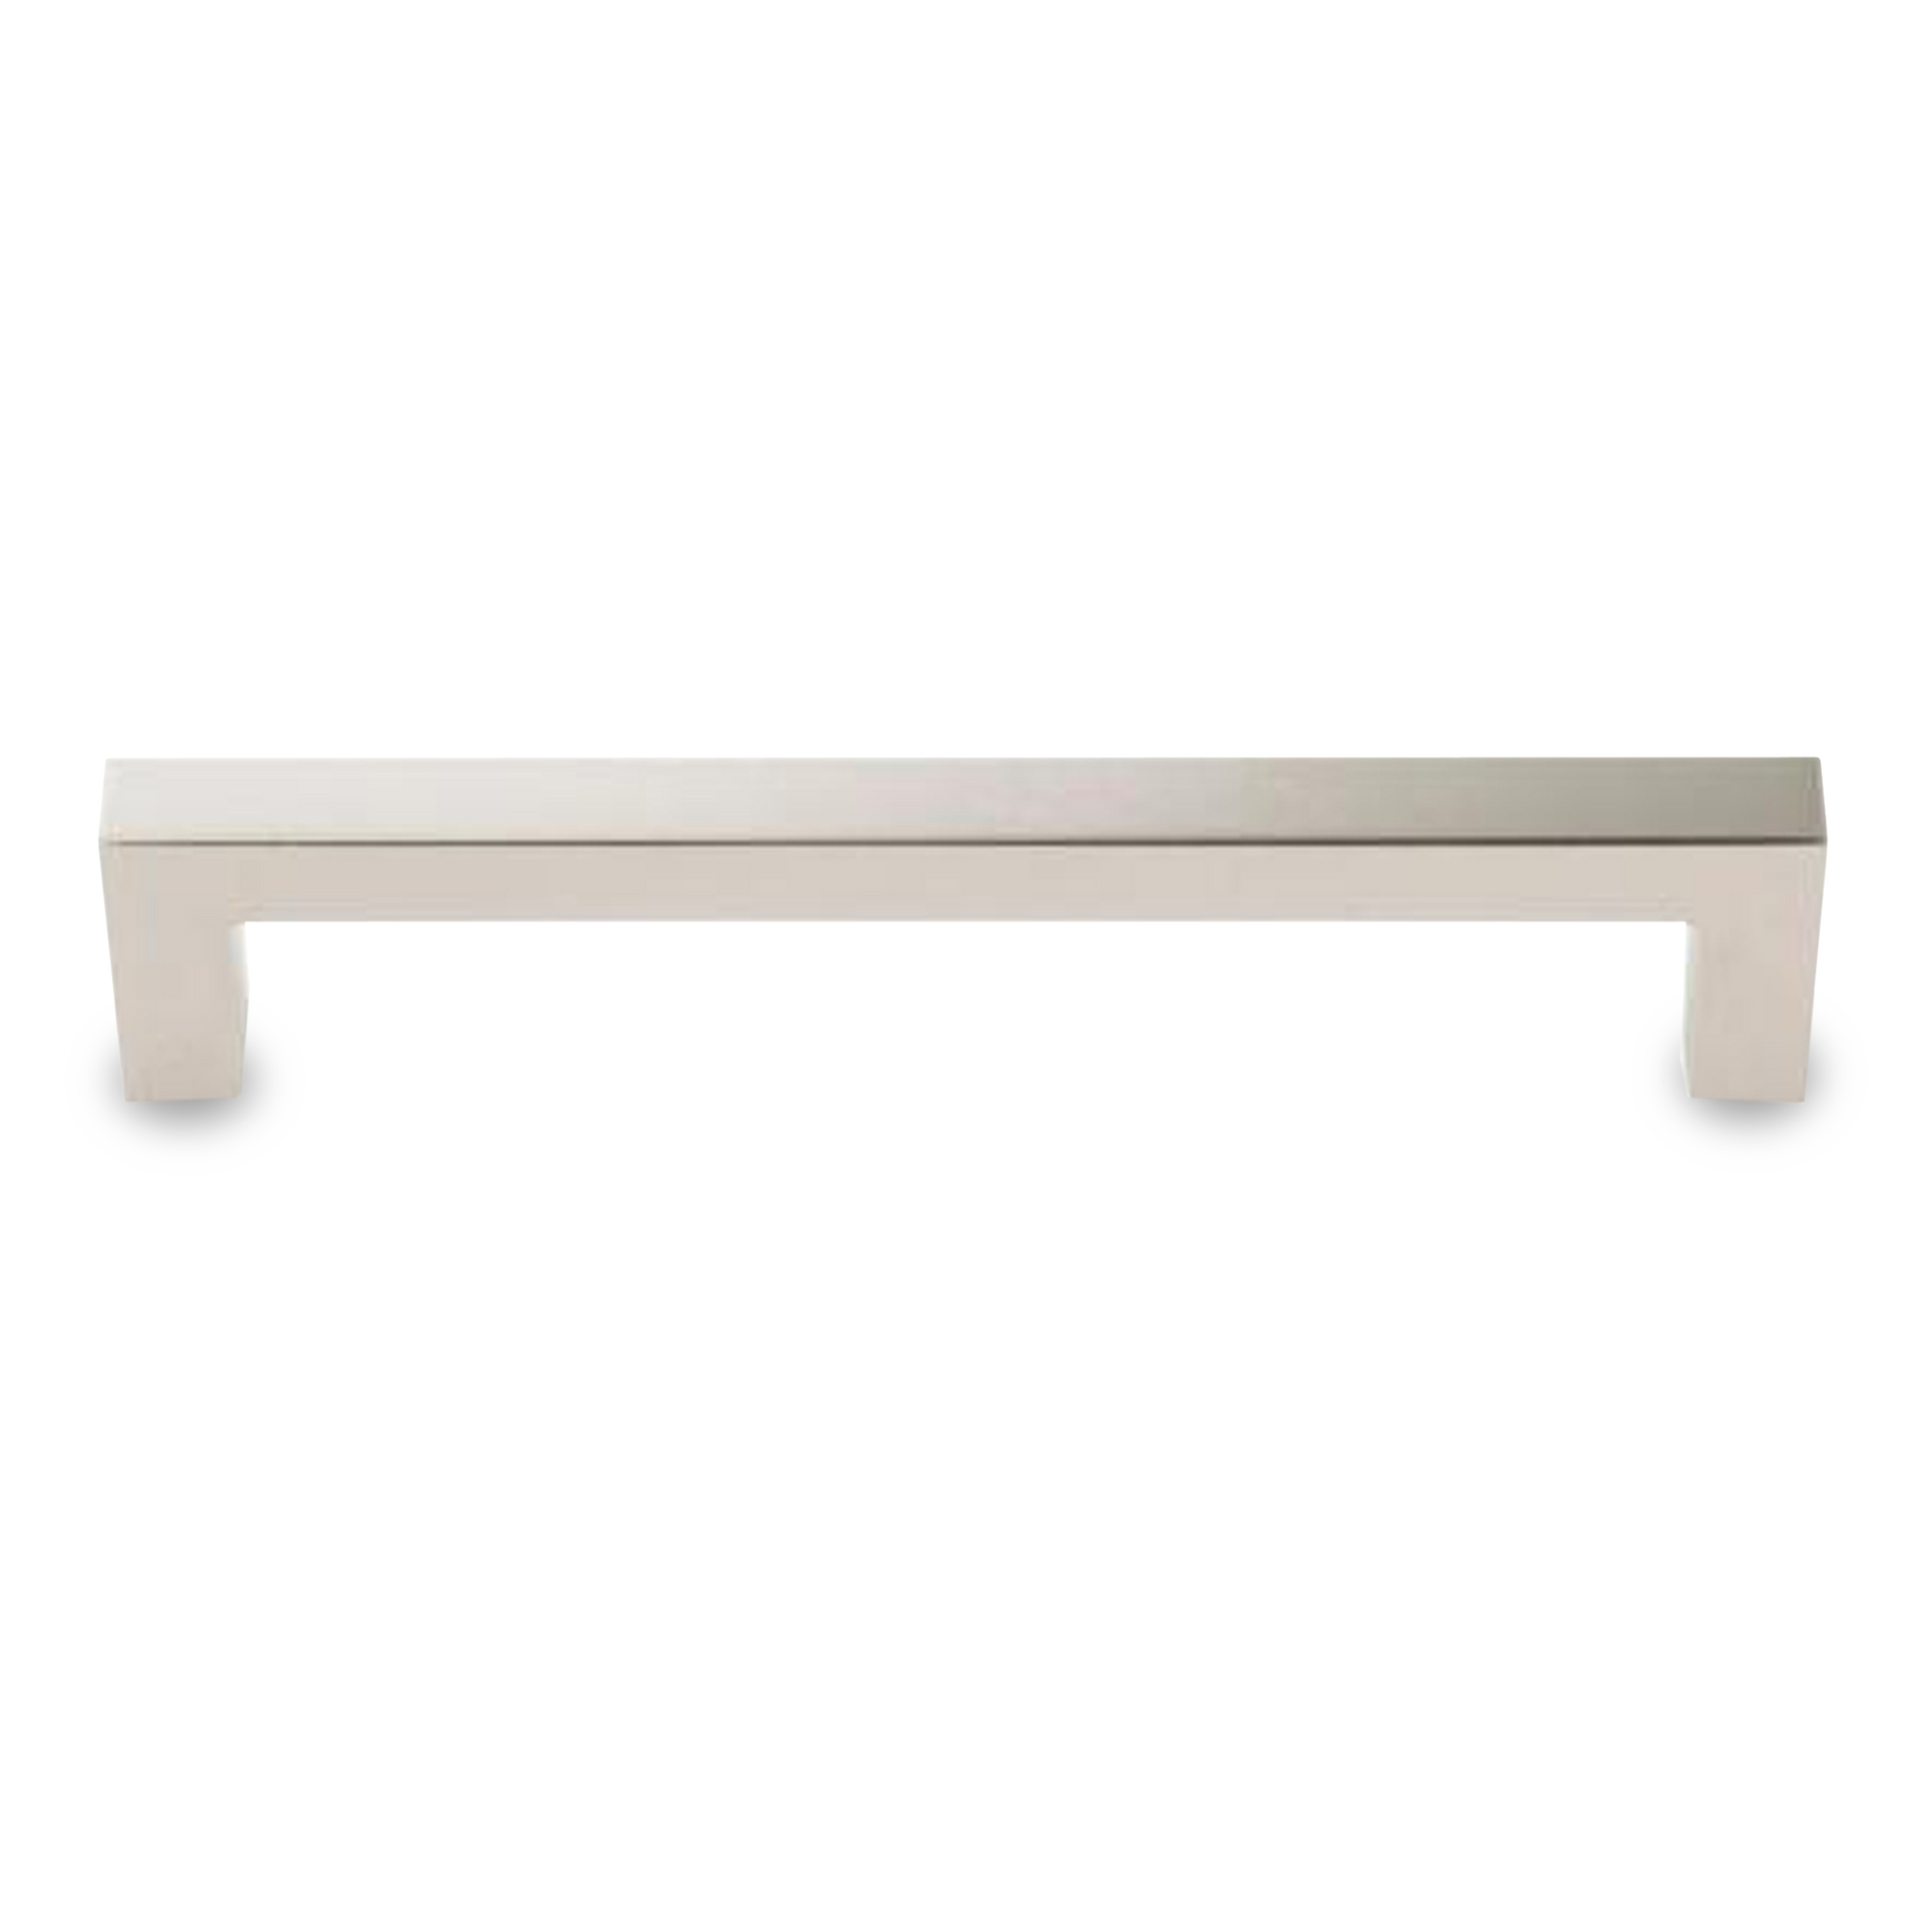 A simple flat rectangular pull with a seamless and modern design.